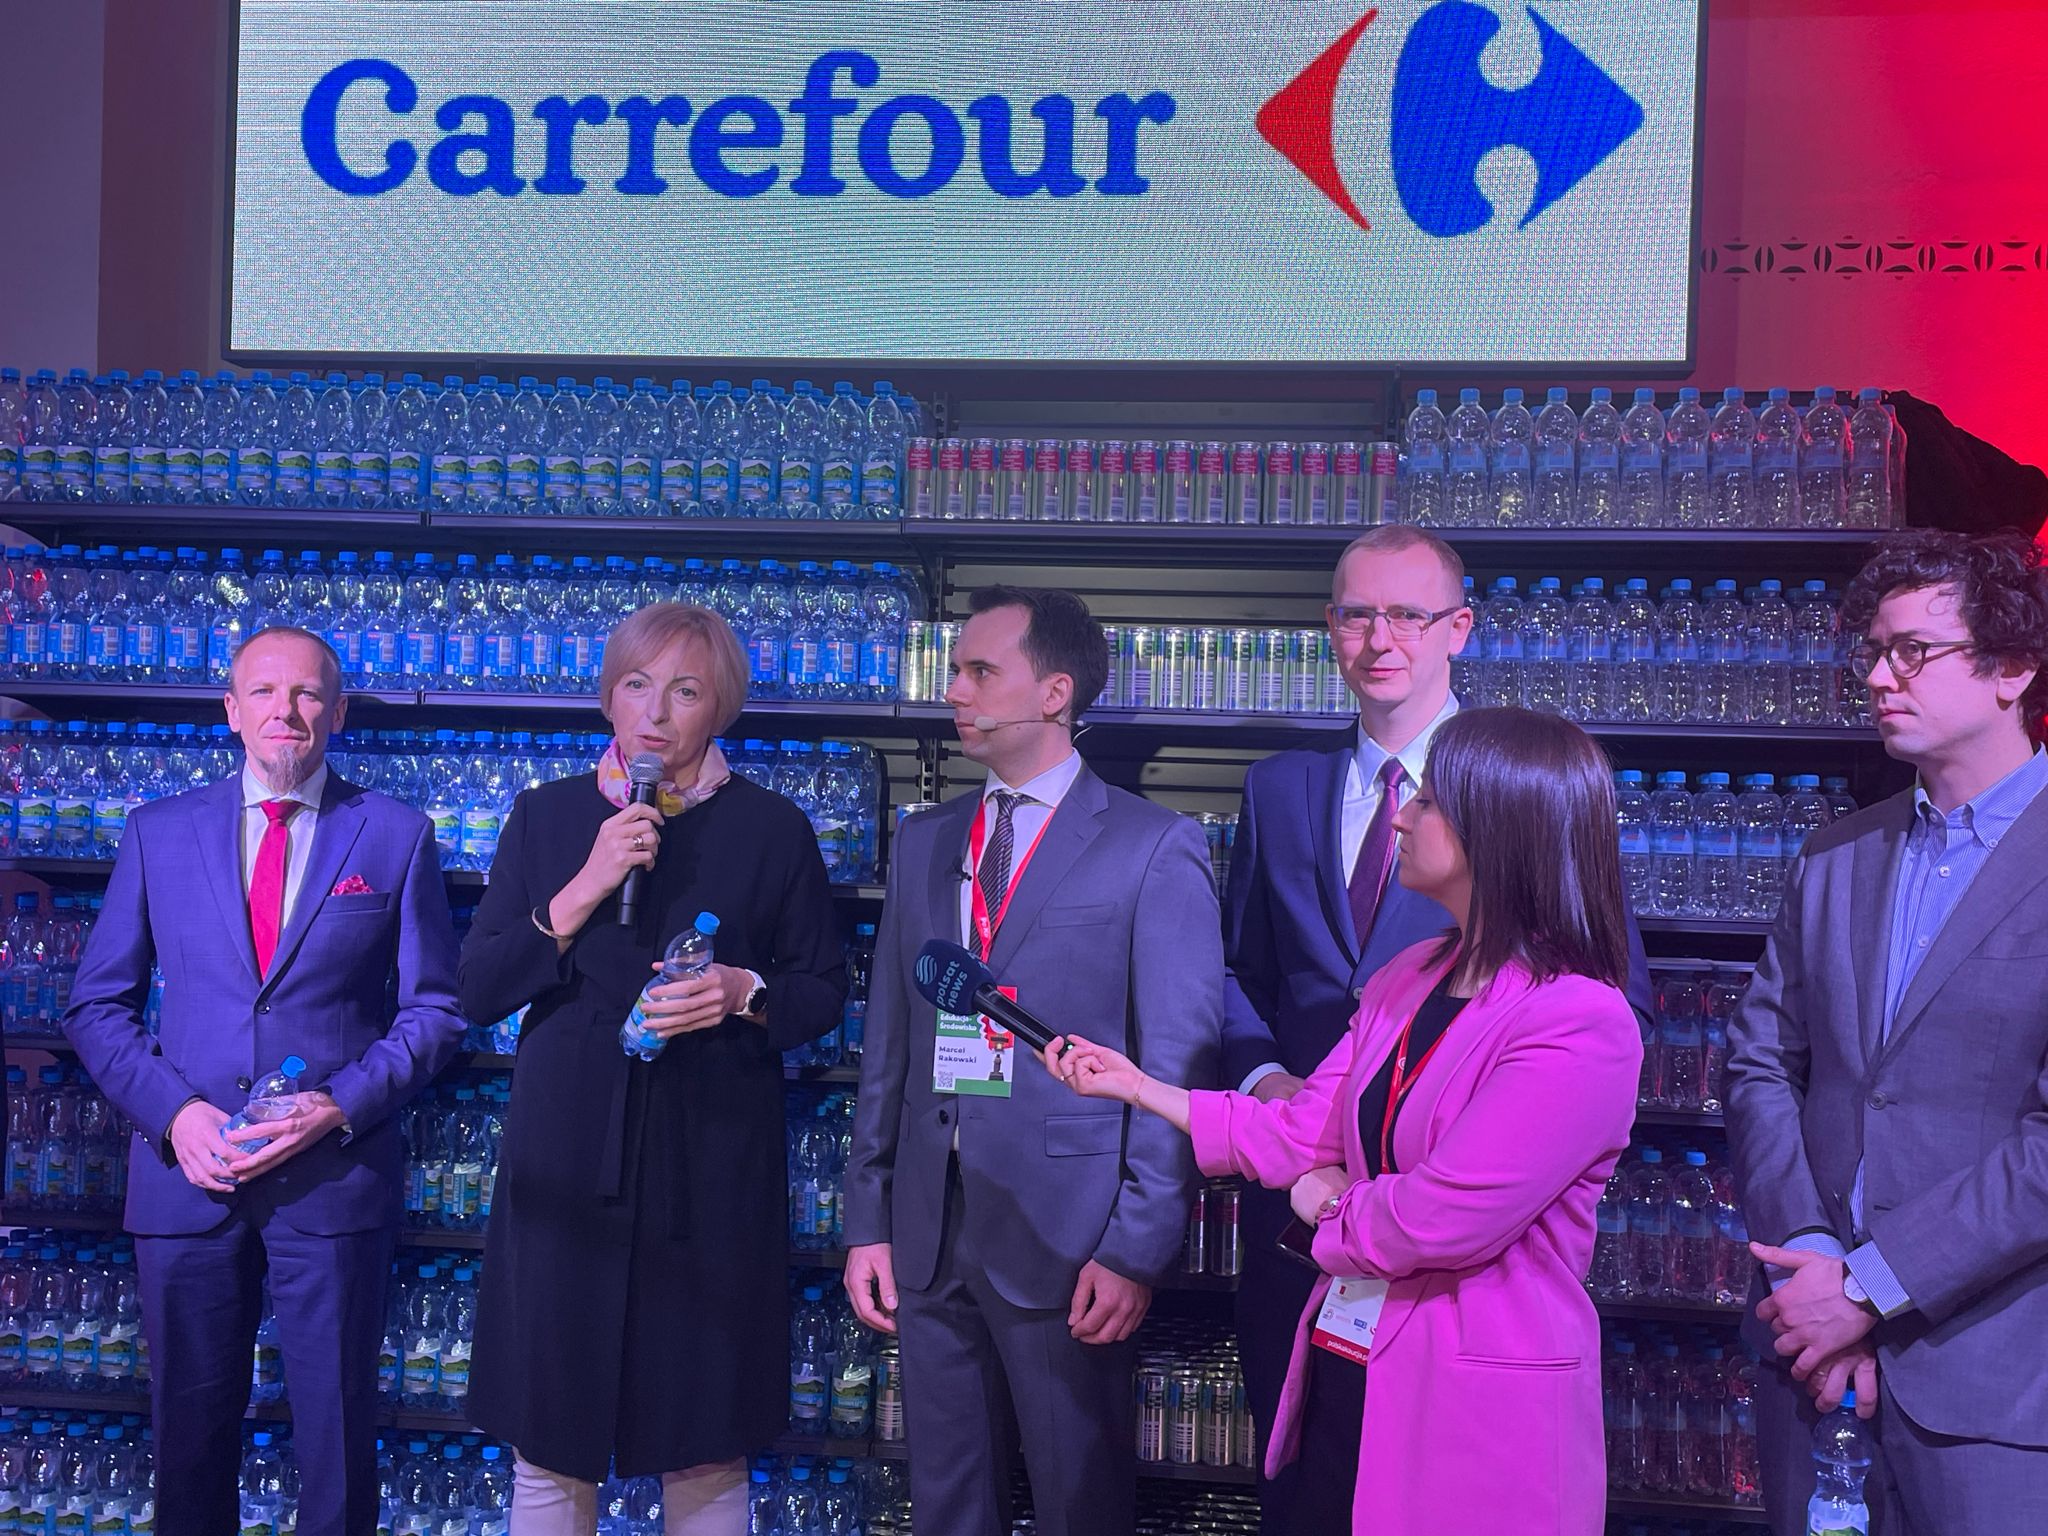 Carrefour Polska summarized the results of the largest deposit system test in Poland